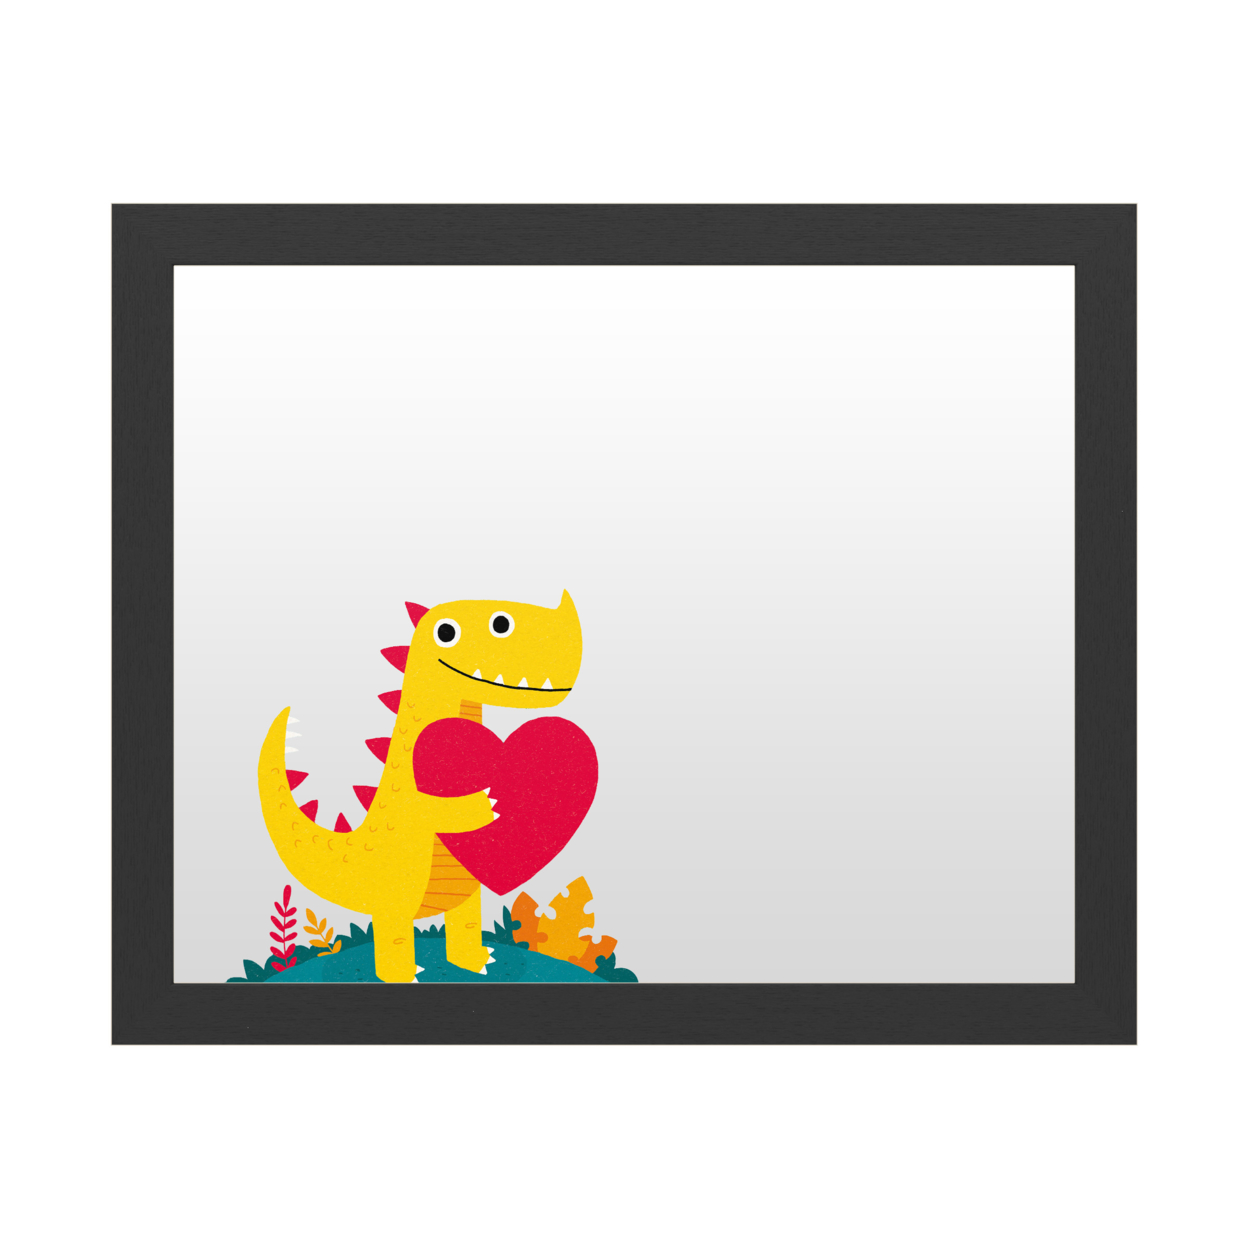 Dry Erase 16 X 20 Marker Board With Printed Artwork - Michael Buxton Dino Love White Board - Ready To Hang